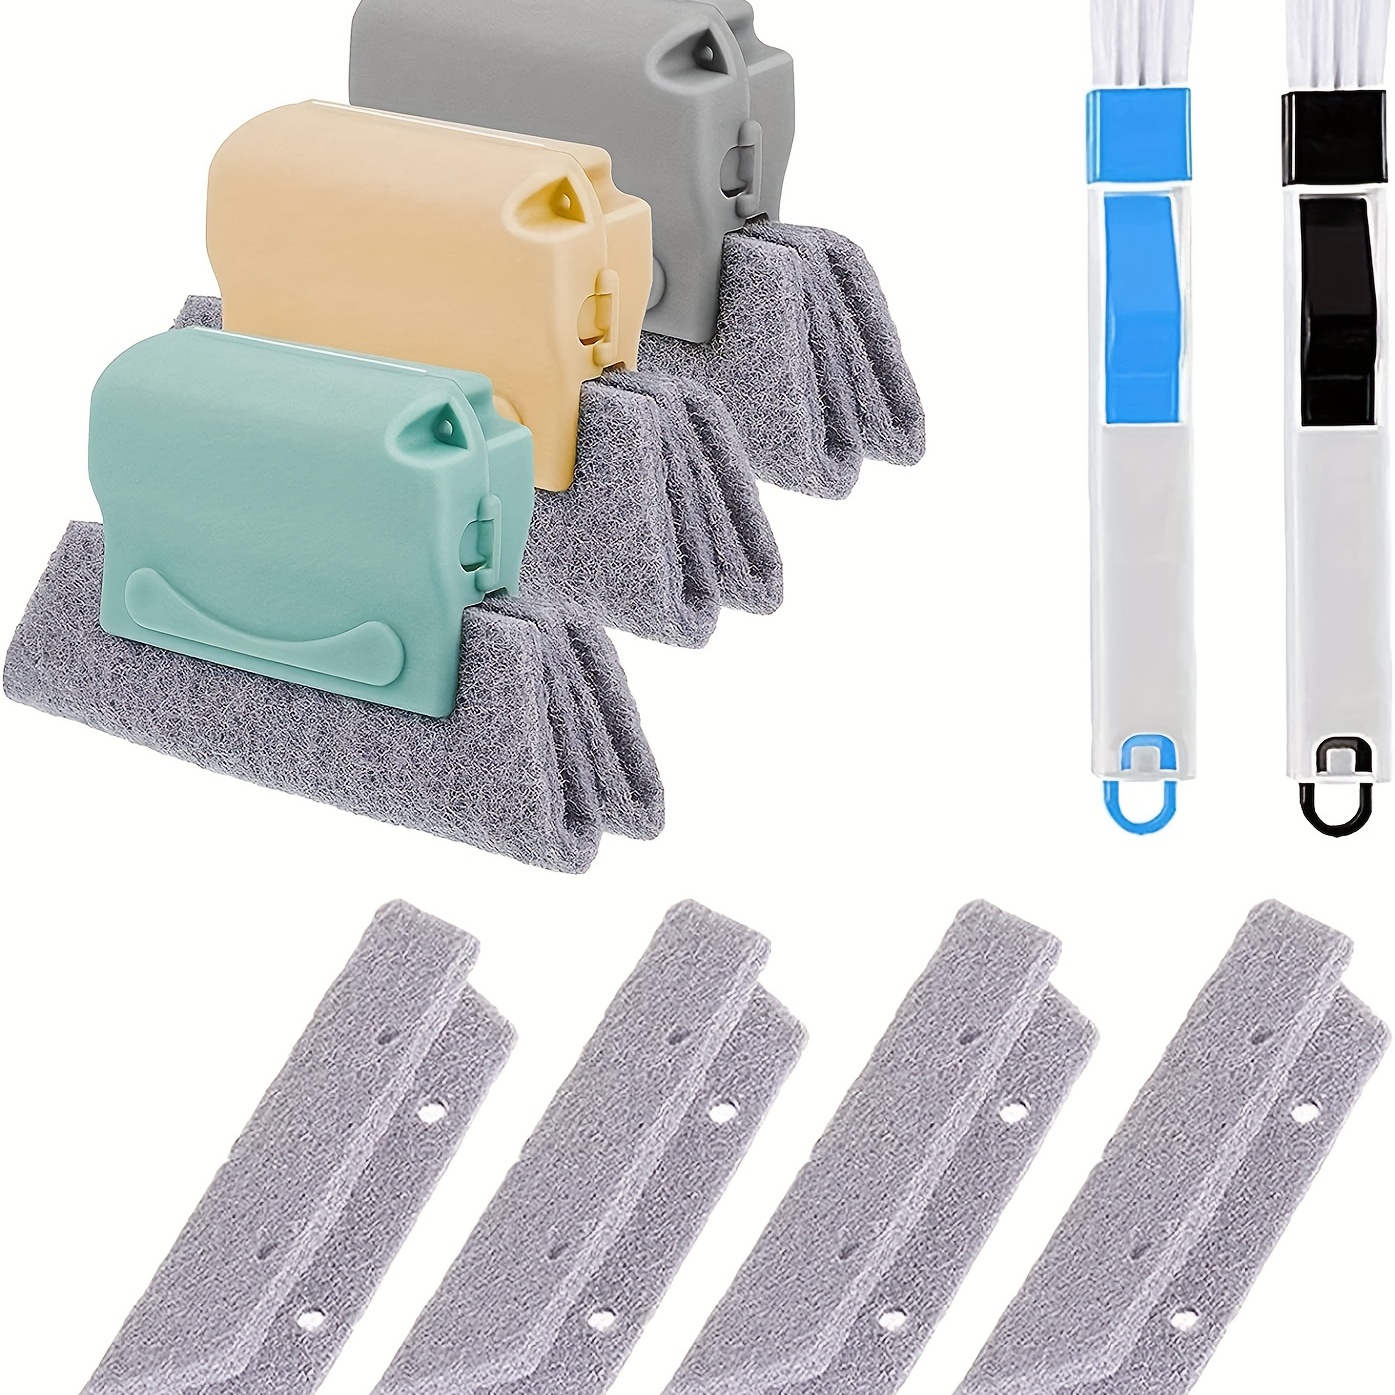 Detachable Window Groove Cleaning Brush Magic Door frame cleaning brush-Quickly  clean all corners and gaps